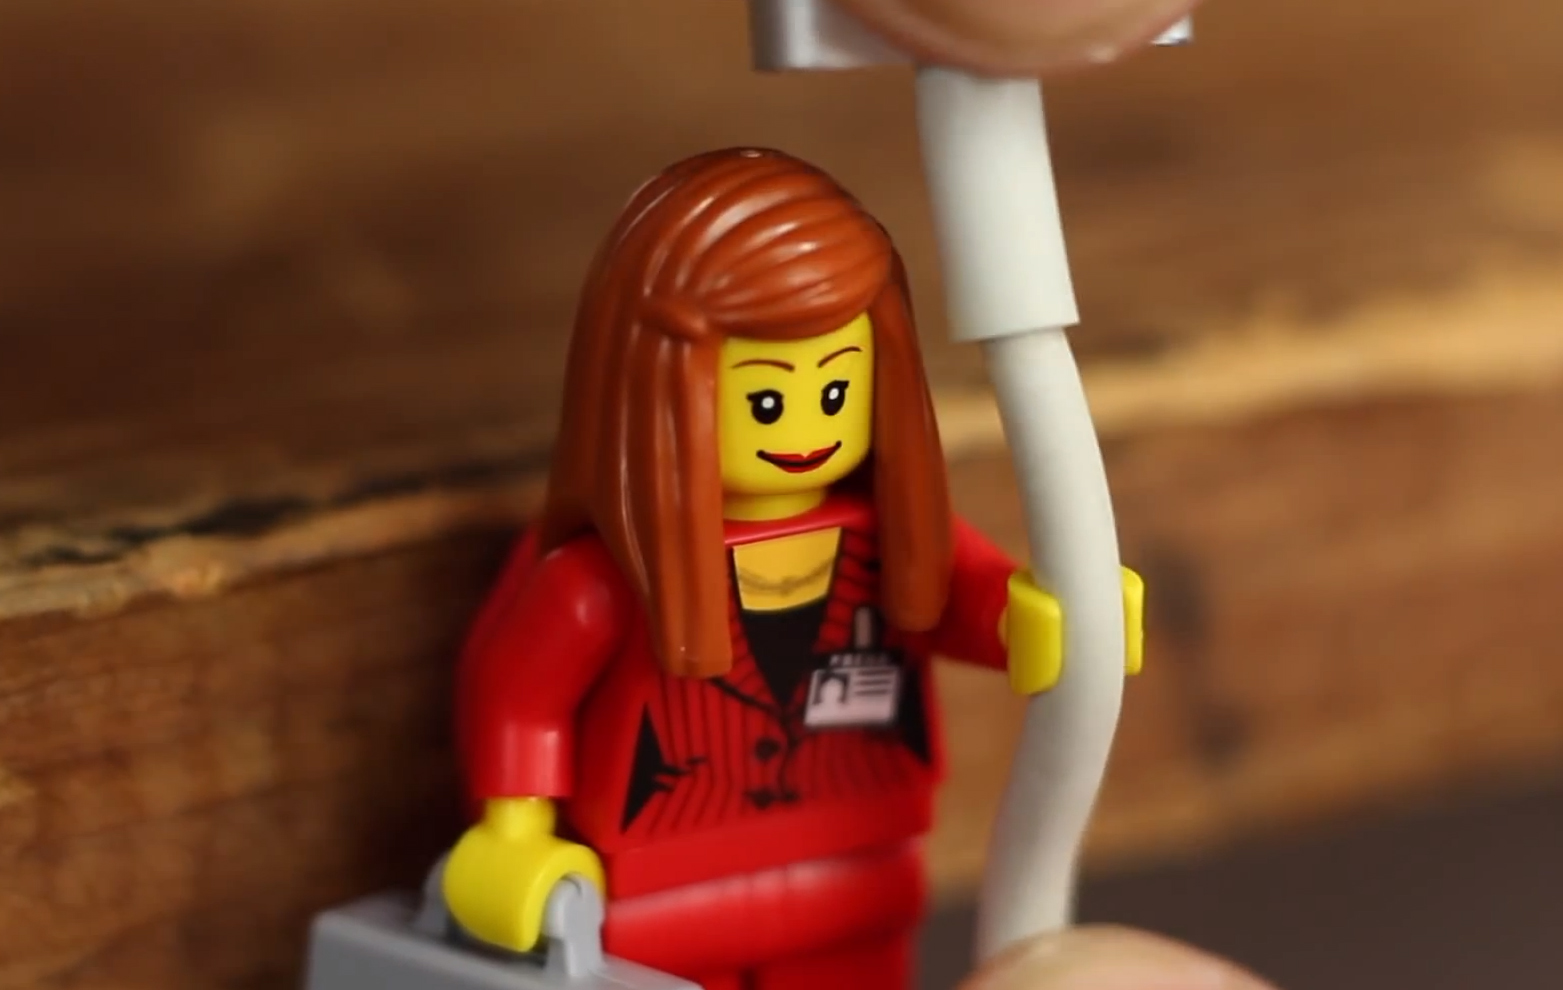 Lego Hands + Sugru = The Coolest Cable Organization Ever